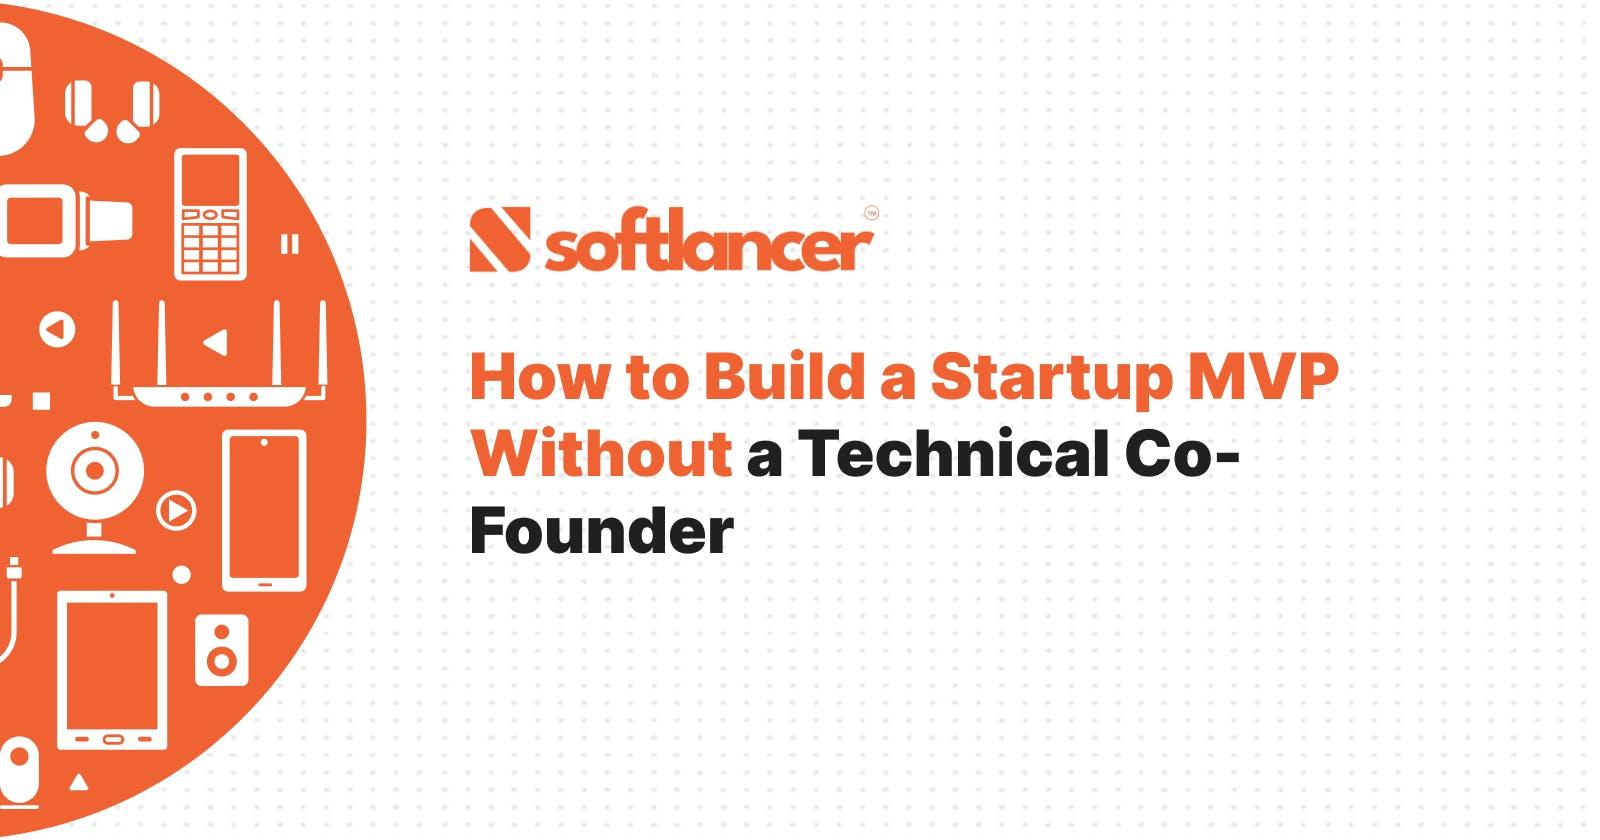 How to Build a Startup MVP Without a Technical Co-Founder